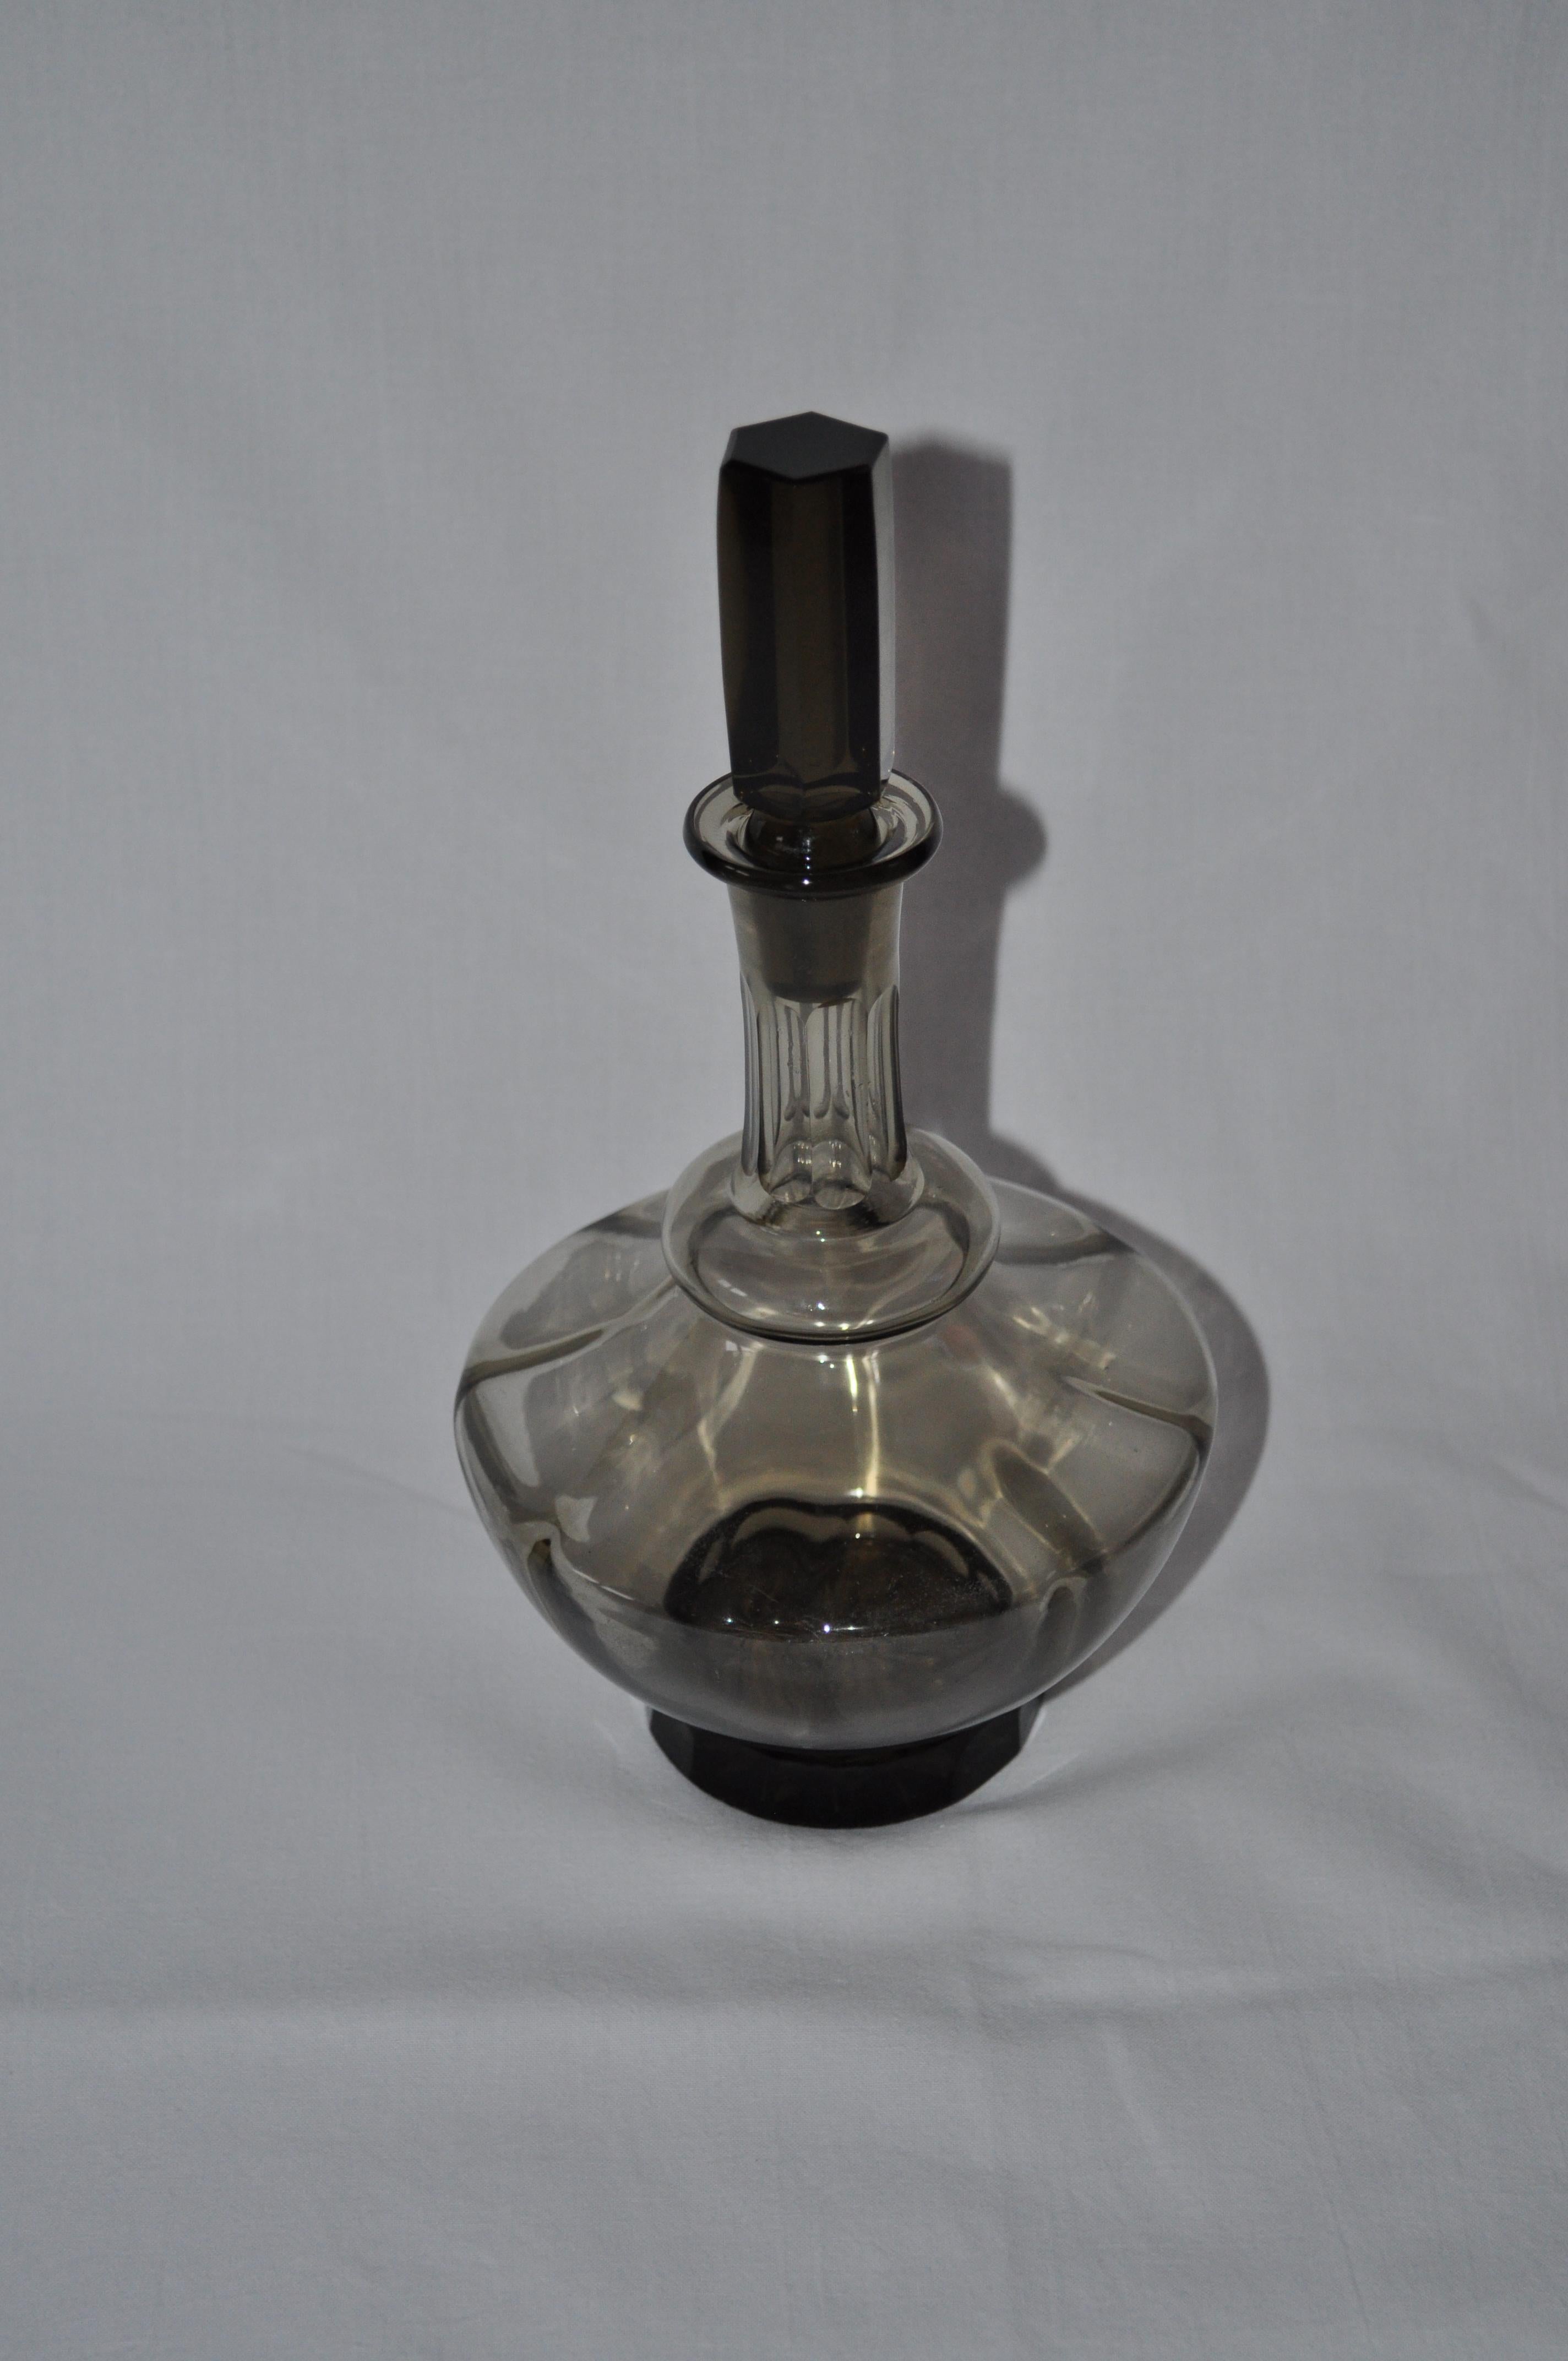 Art Deco Hungarian decanter smoked glass
Good vintage condition; no chips, cracks, or breaks.